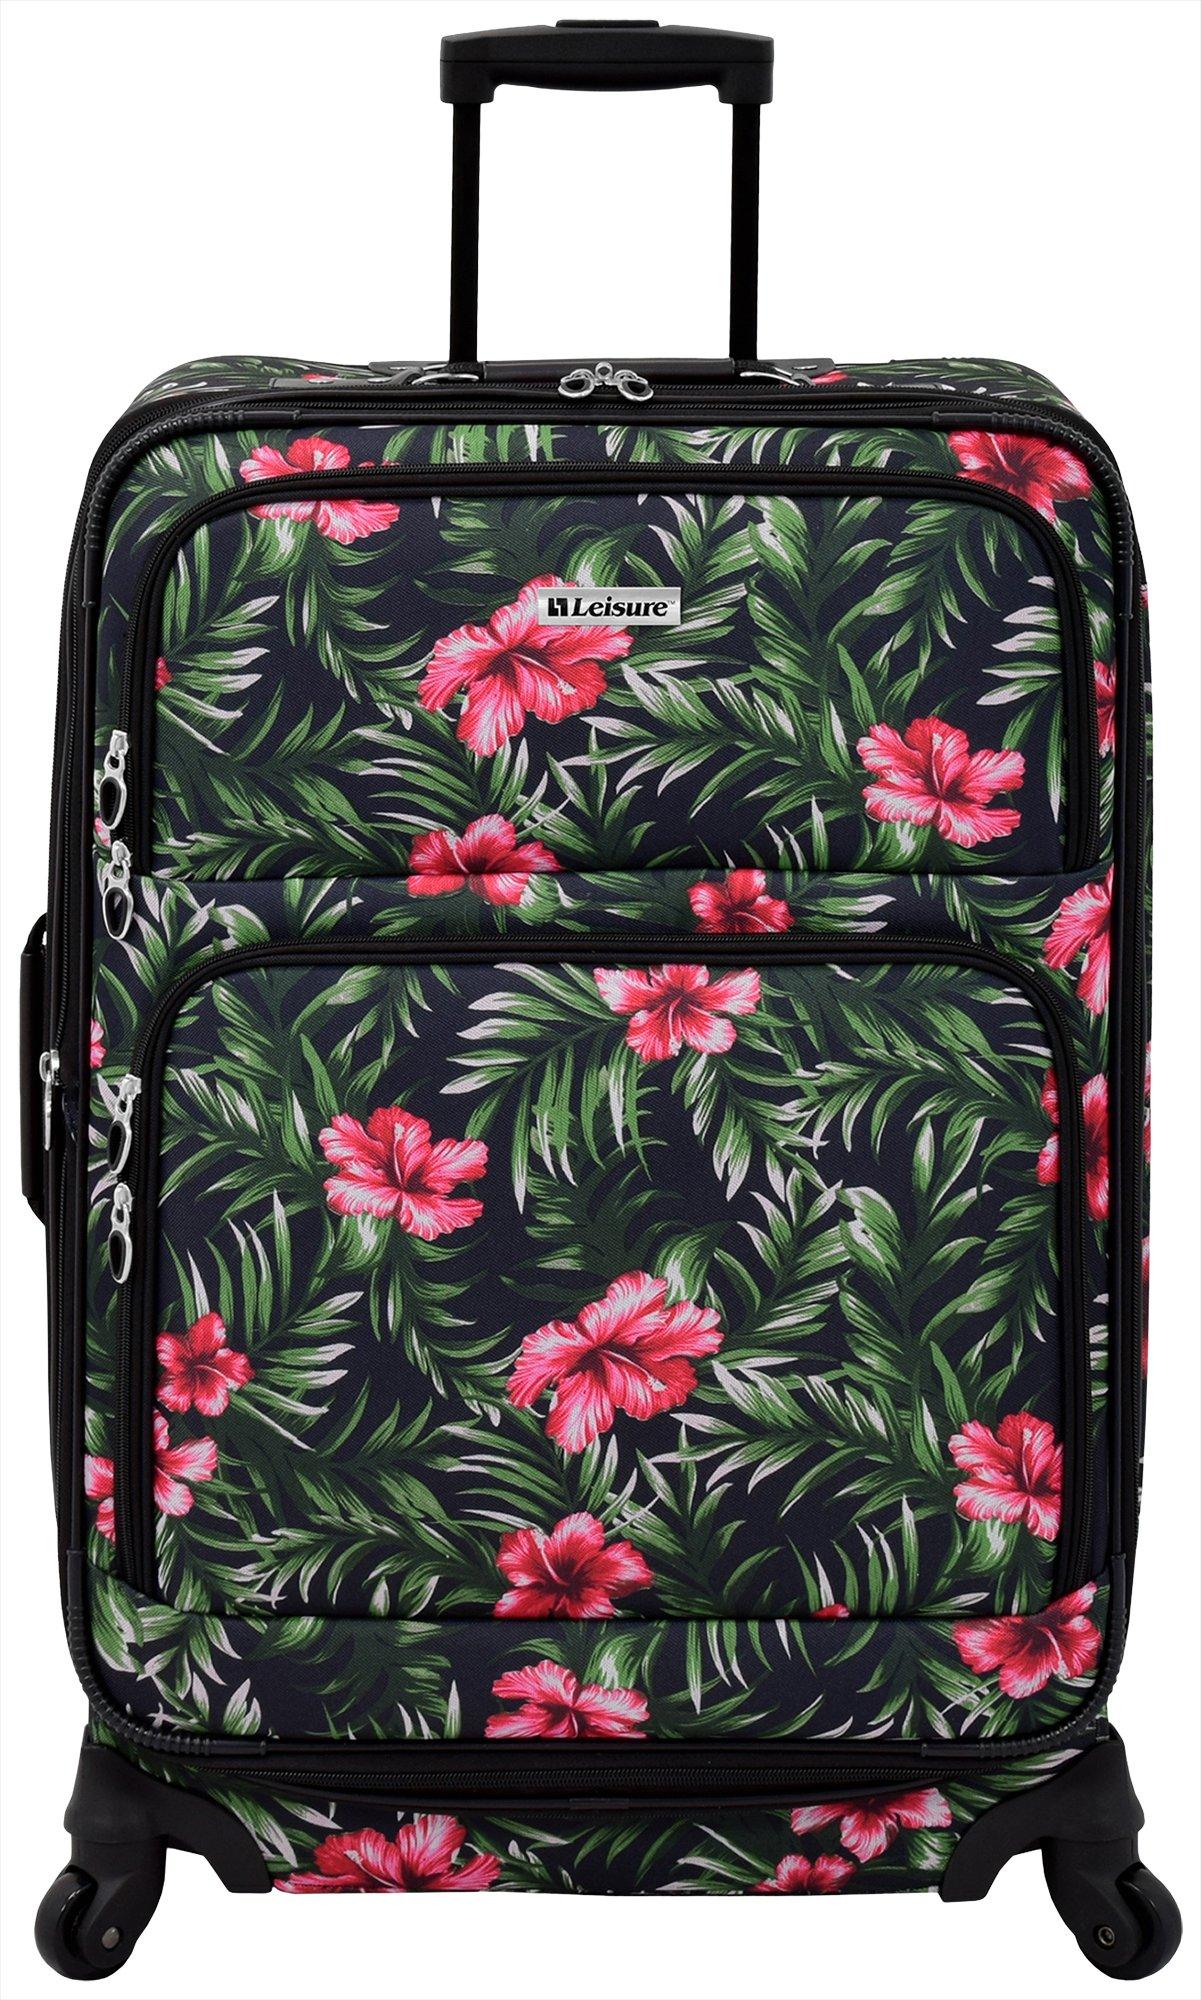 Leisure Luggage 25'' Lafayette Hibiscus Palm Spinner Luggage